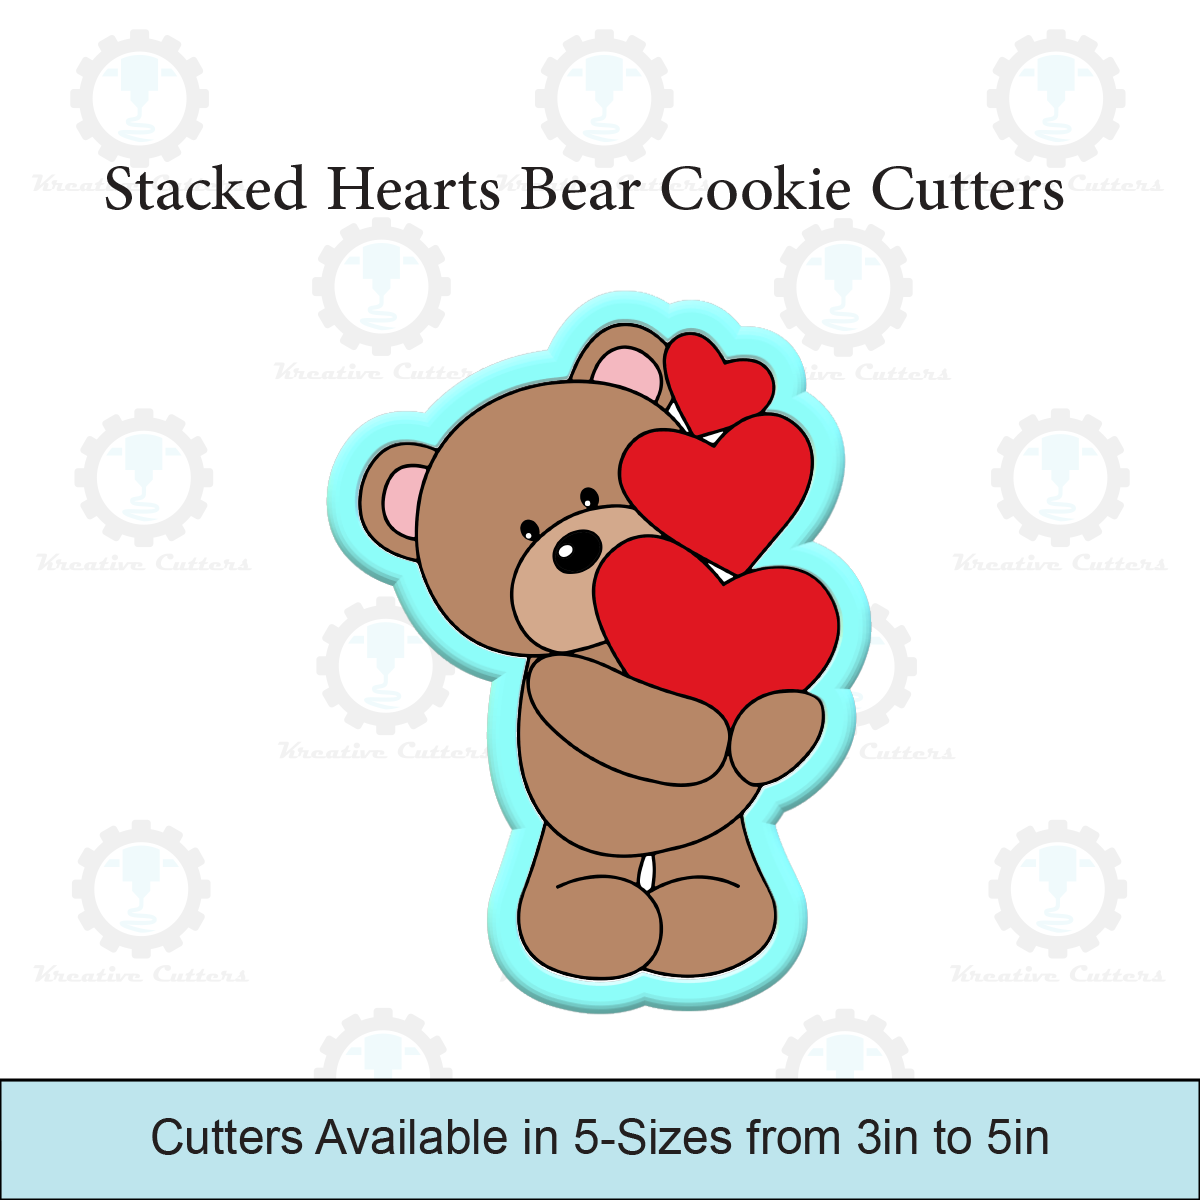 Stacked Hearts Bear Cookie Cutters